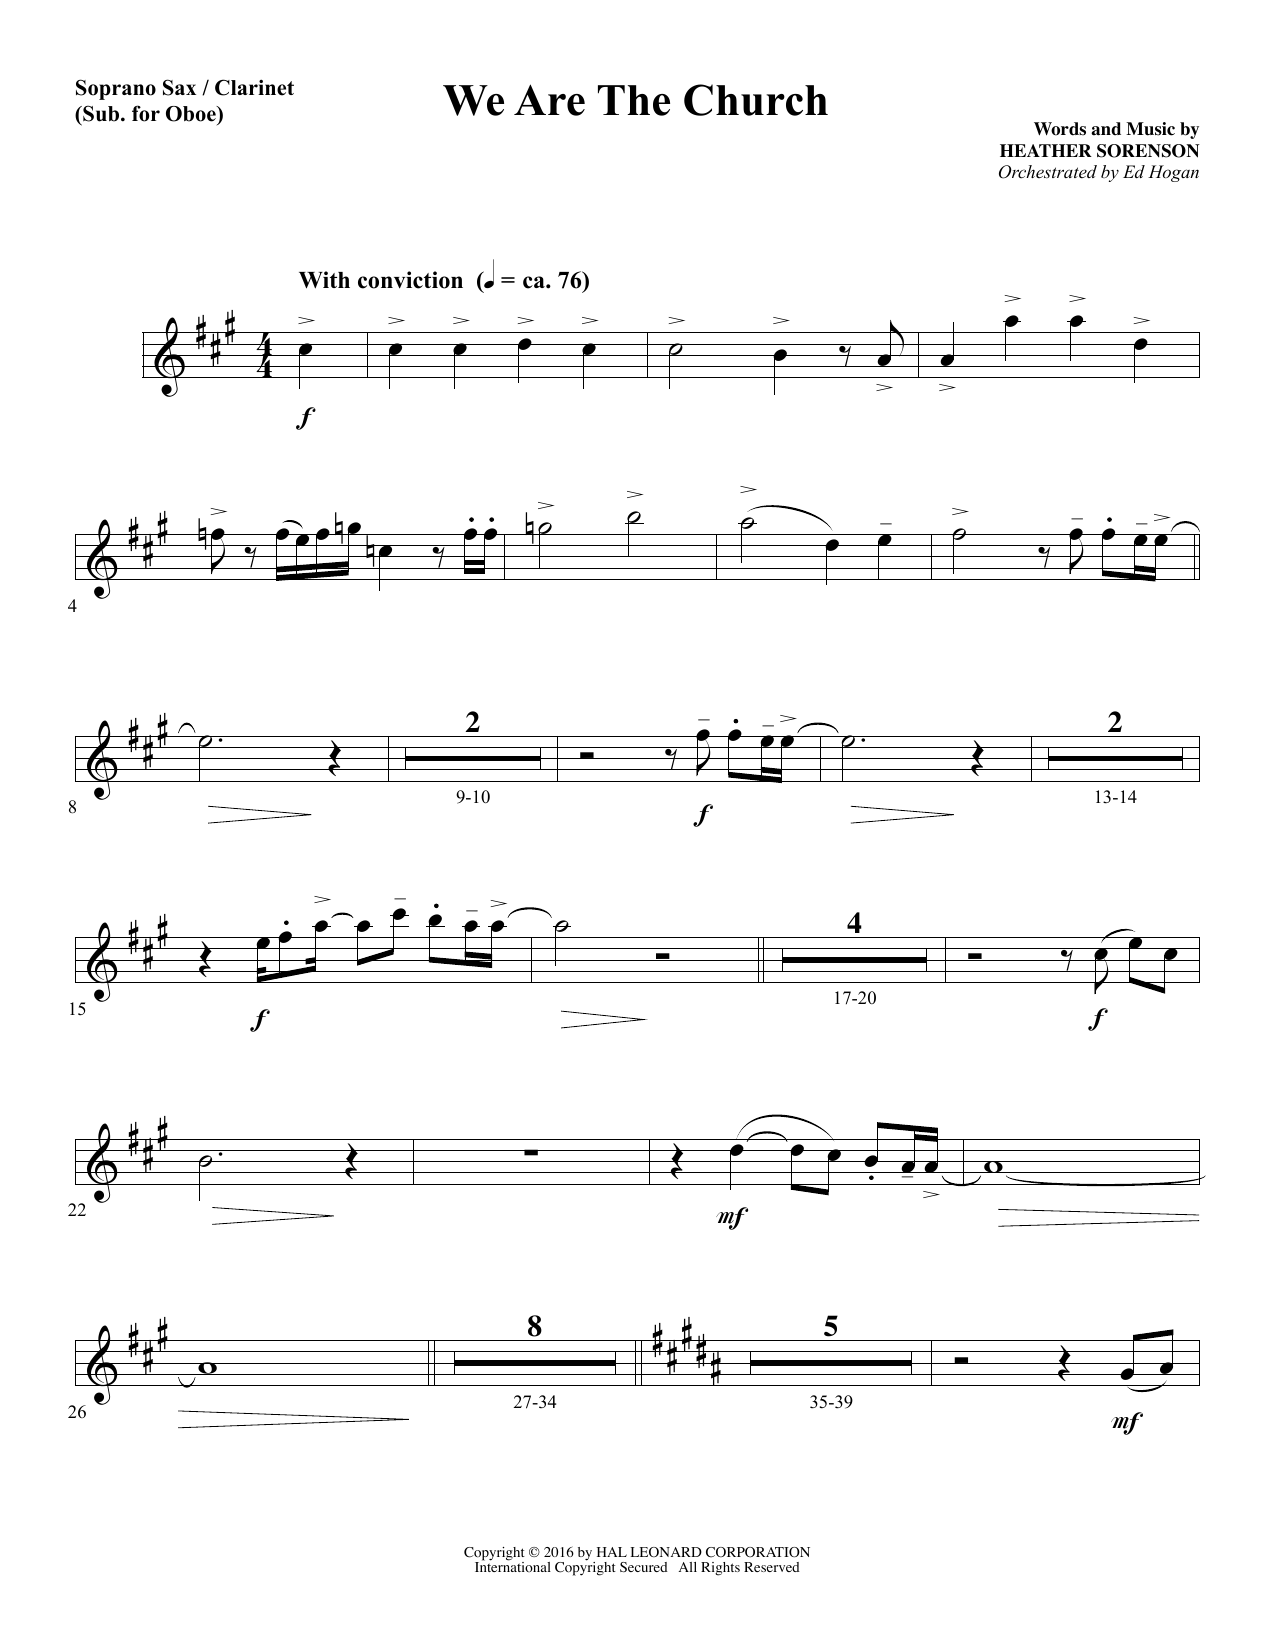 Download Heather Sorenson We Are the Church - Soprano Sax/Clarinet(sub oboe) sheet music and printable PDF score & Sacred music notes